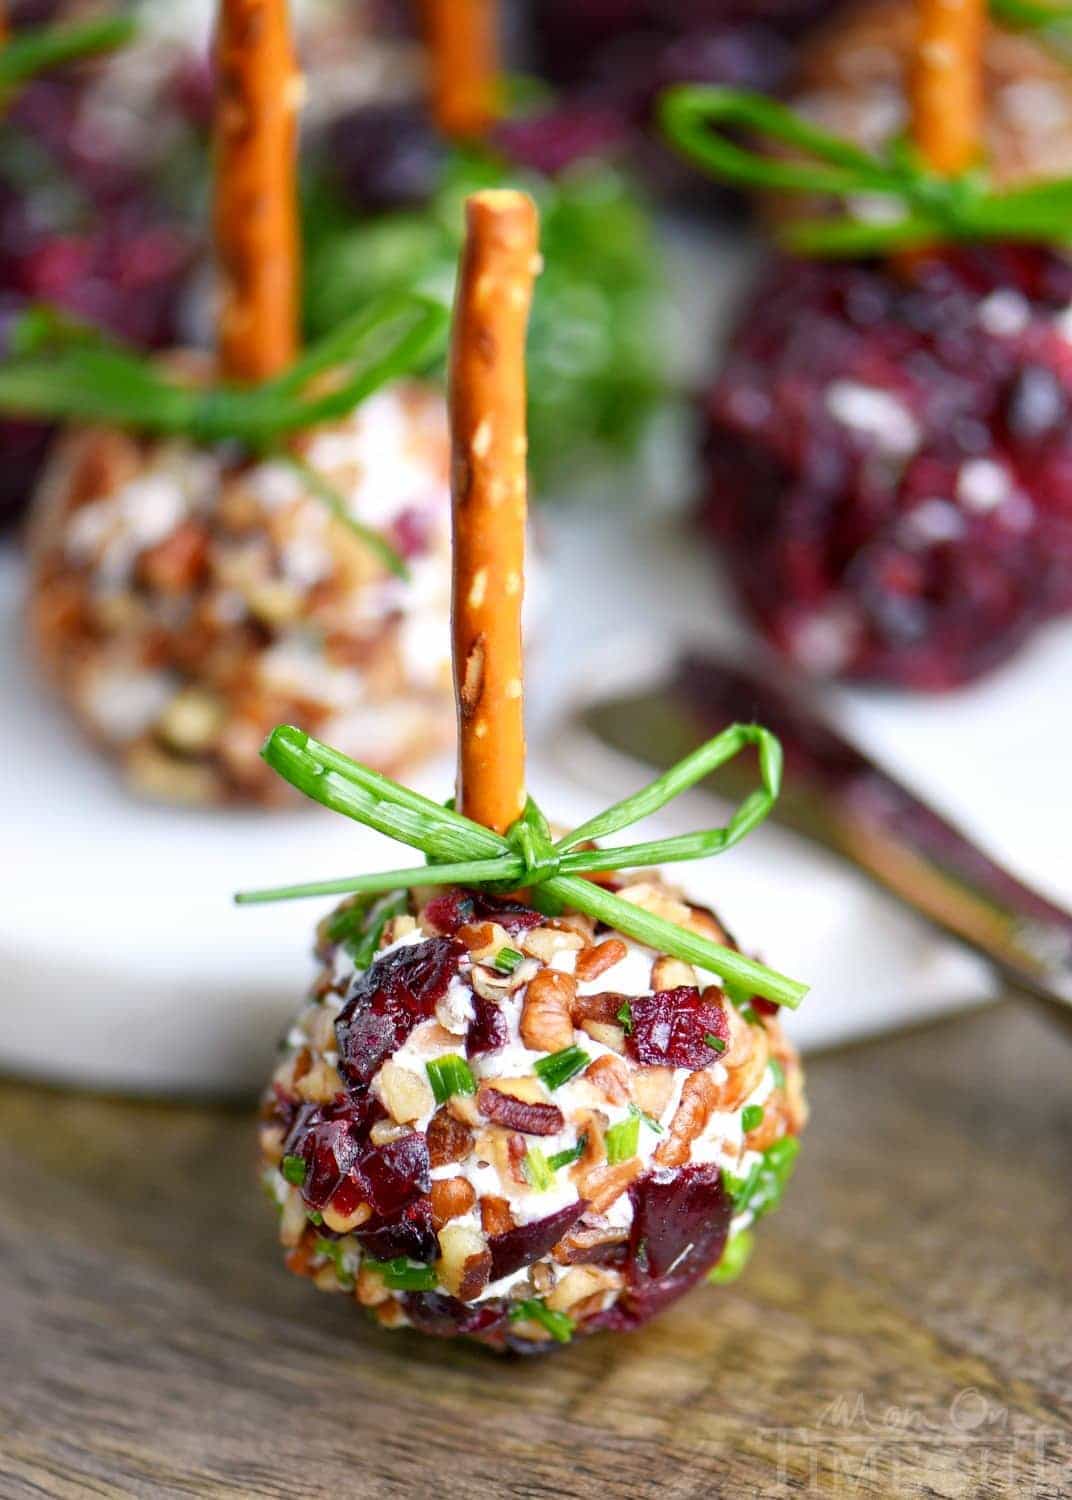 Cranberry Pecan Mini Goat Cheese Balls! Holiday entertaining has never been easier or more delicious! So easy to make and gorgeous too! Perfect for Thanksgiving, Christmas, and New Year's! (Can be made in advance!) // Mom On Timeout